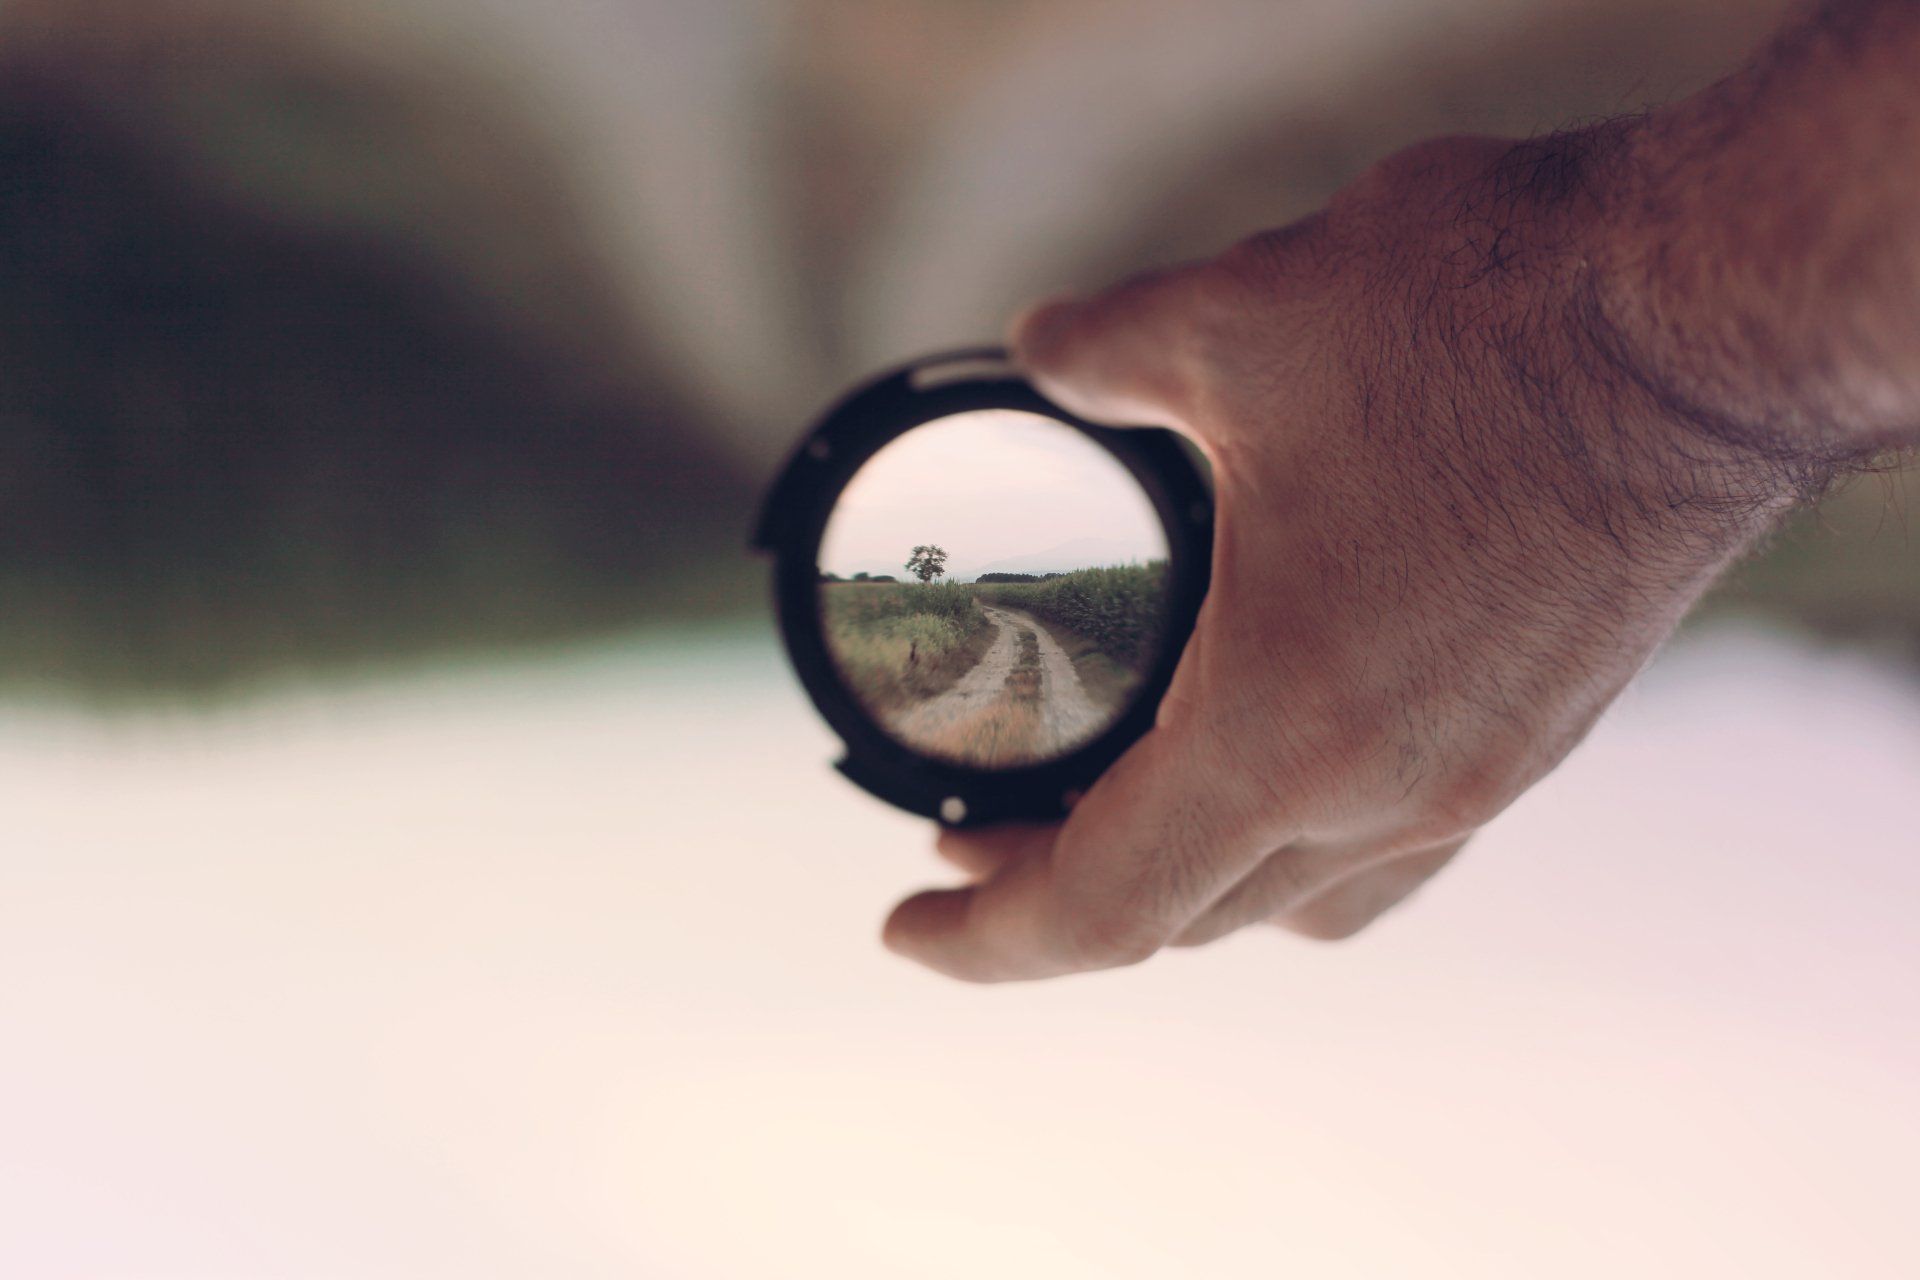 A hand holds a magnifying glass. The image in the center is in focus, while the rest is blurry.